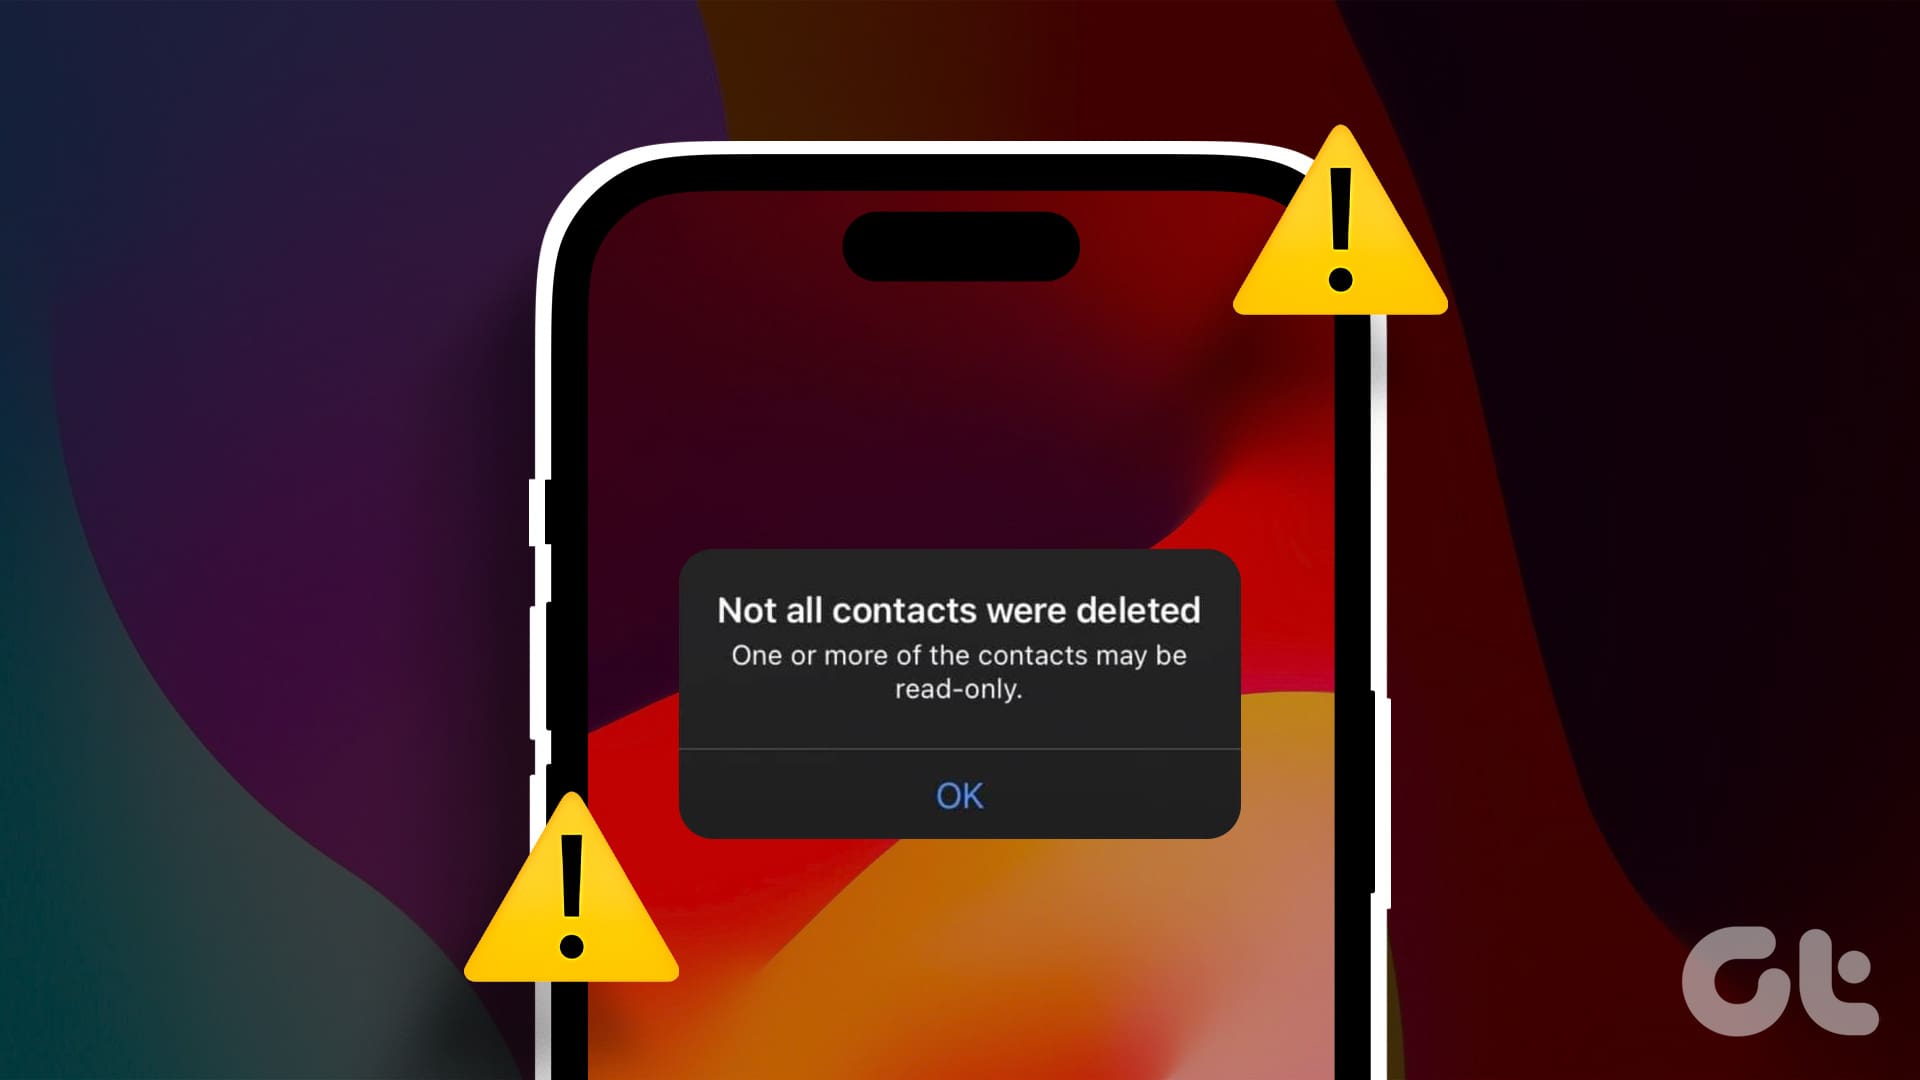 Top 6 Fixes for ‘Not All Contacts Were Deleted’ Error on iPhone